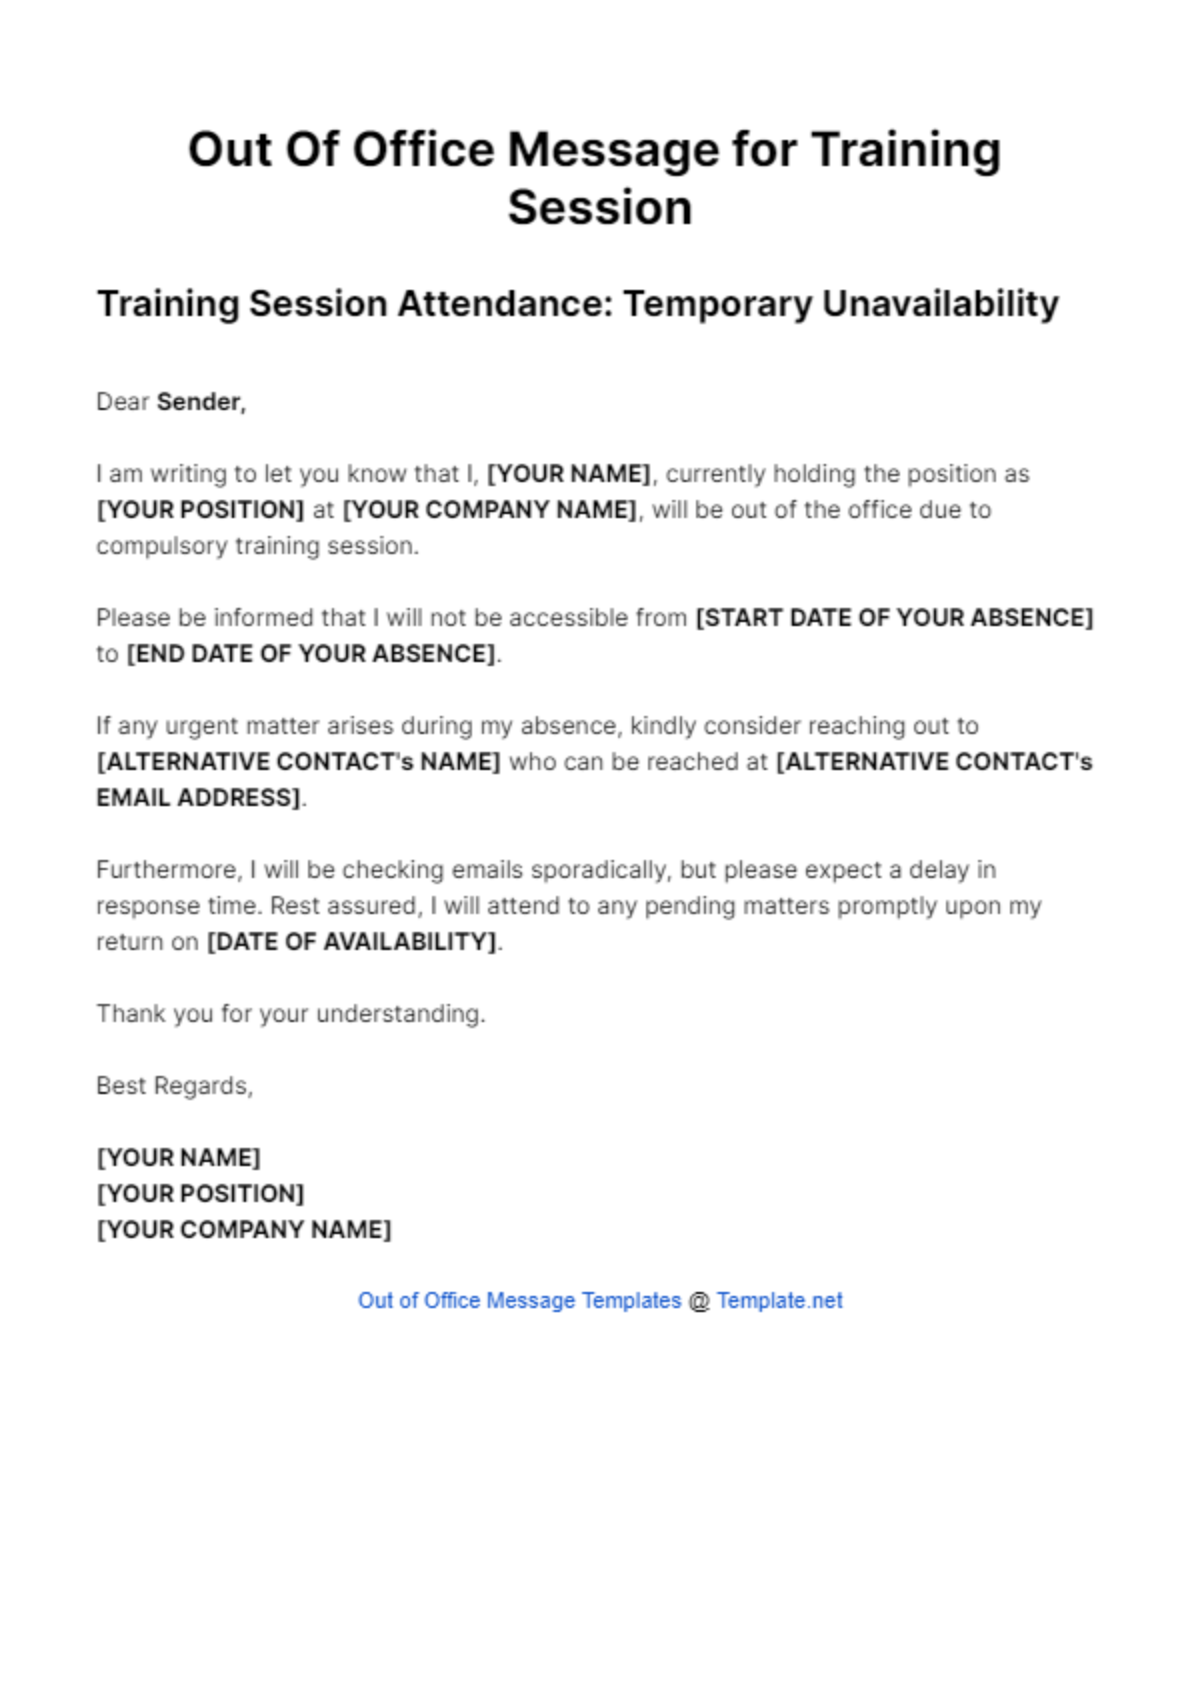 Free Out Of Office Message for Training Session Template